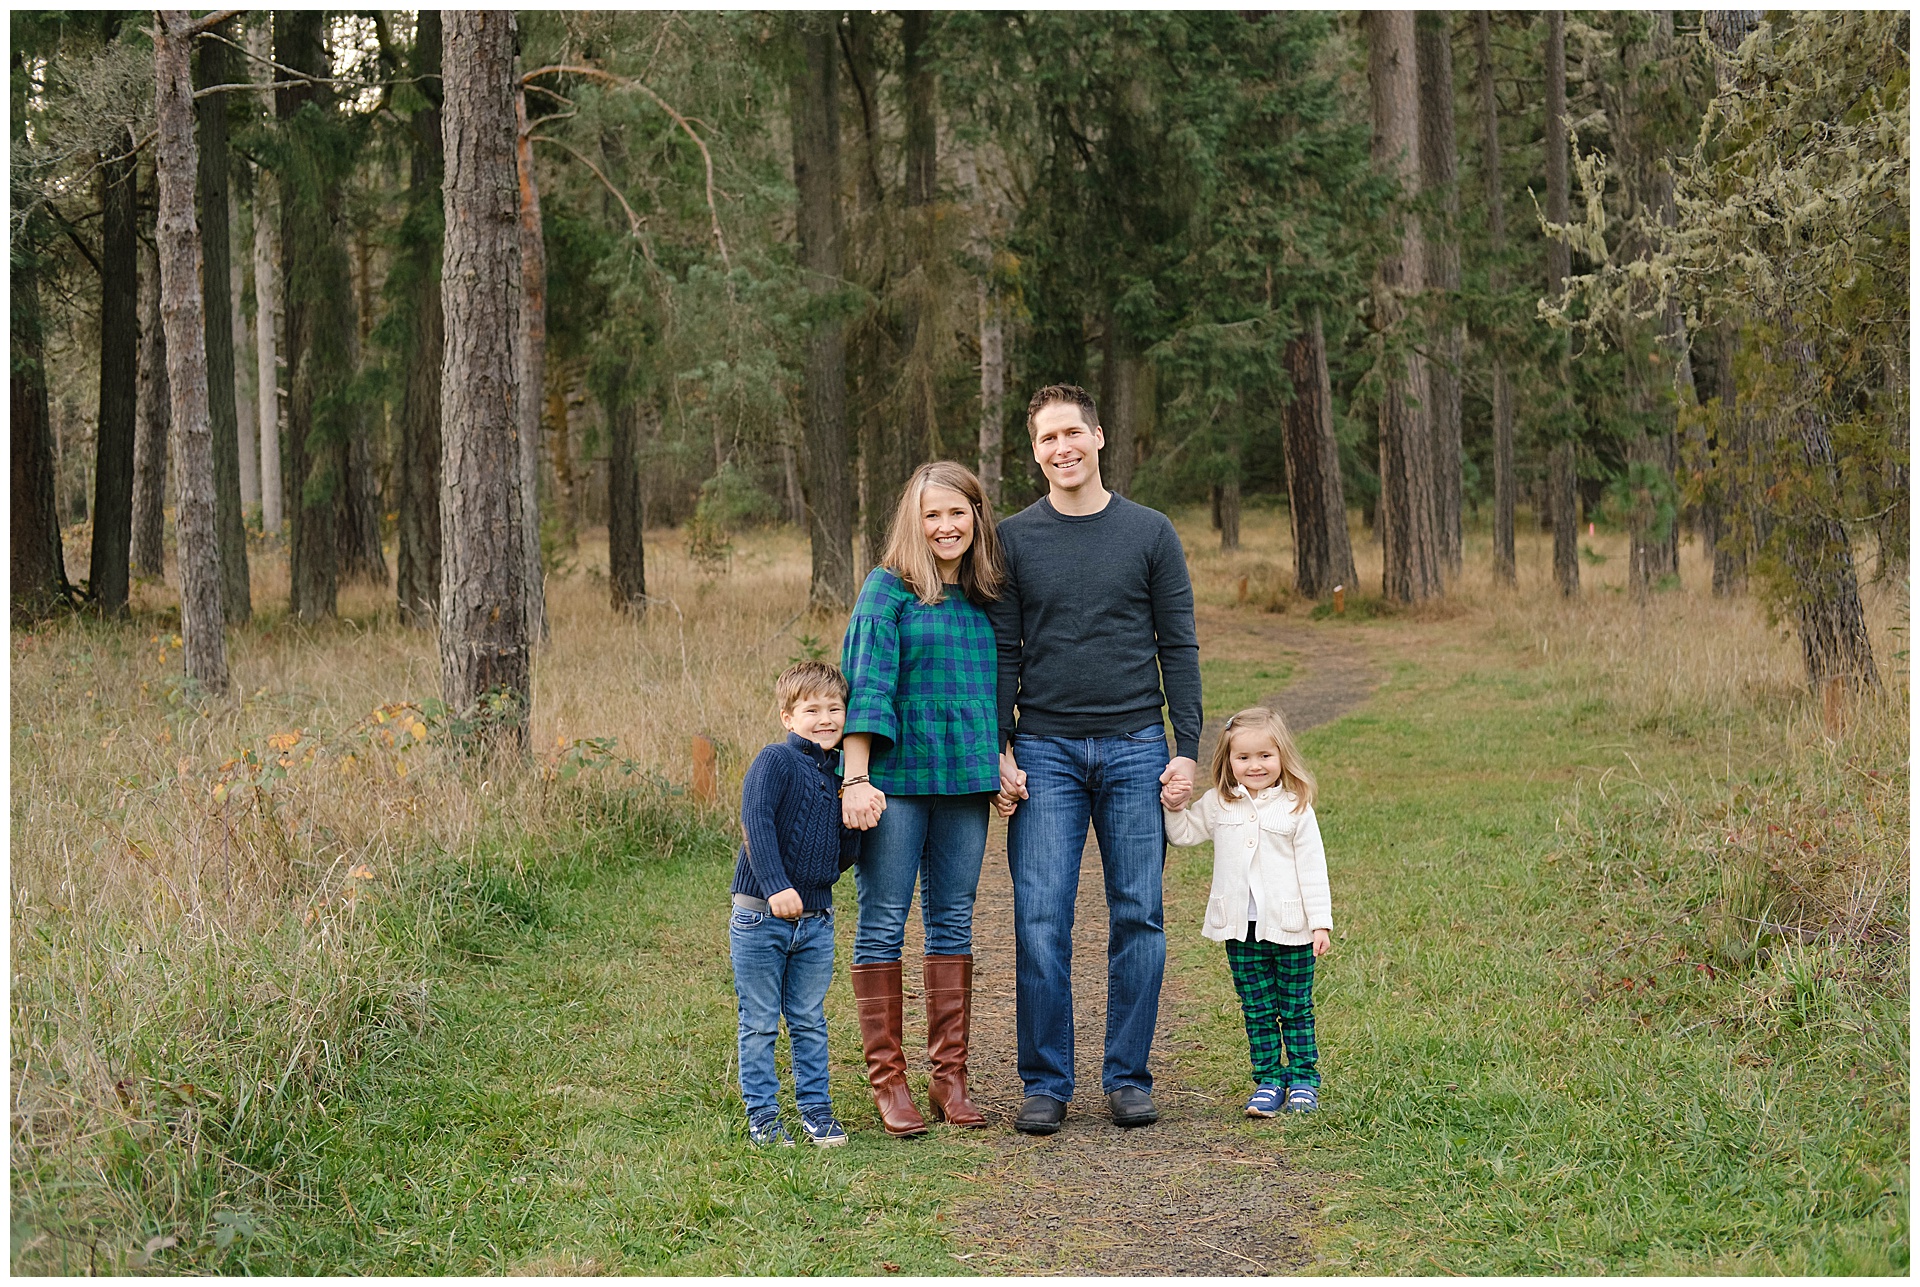 Family portraits in Corvallis by Alison Smith of Thistledown Photography